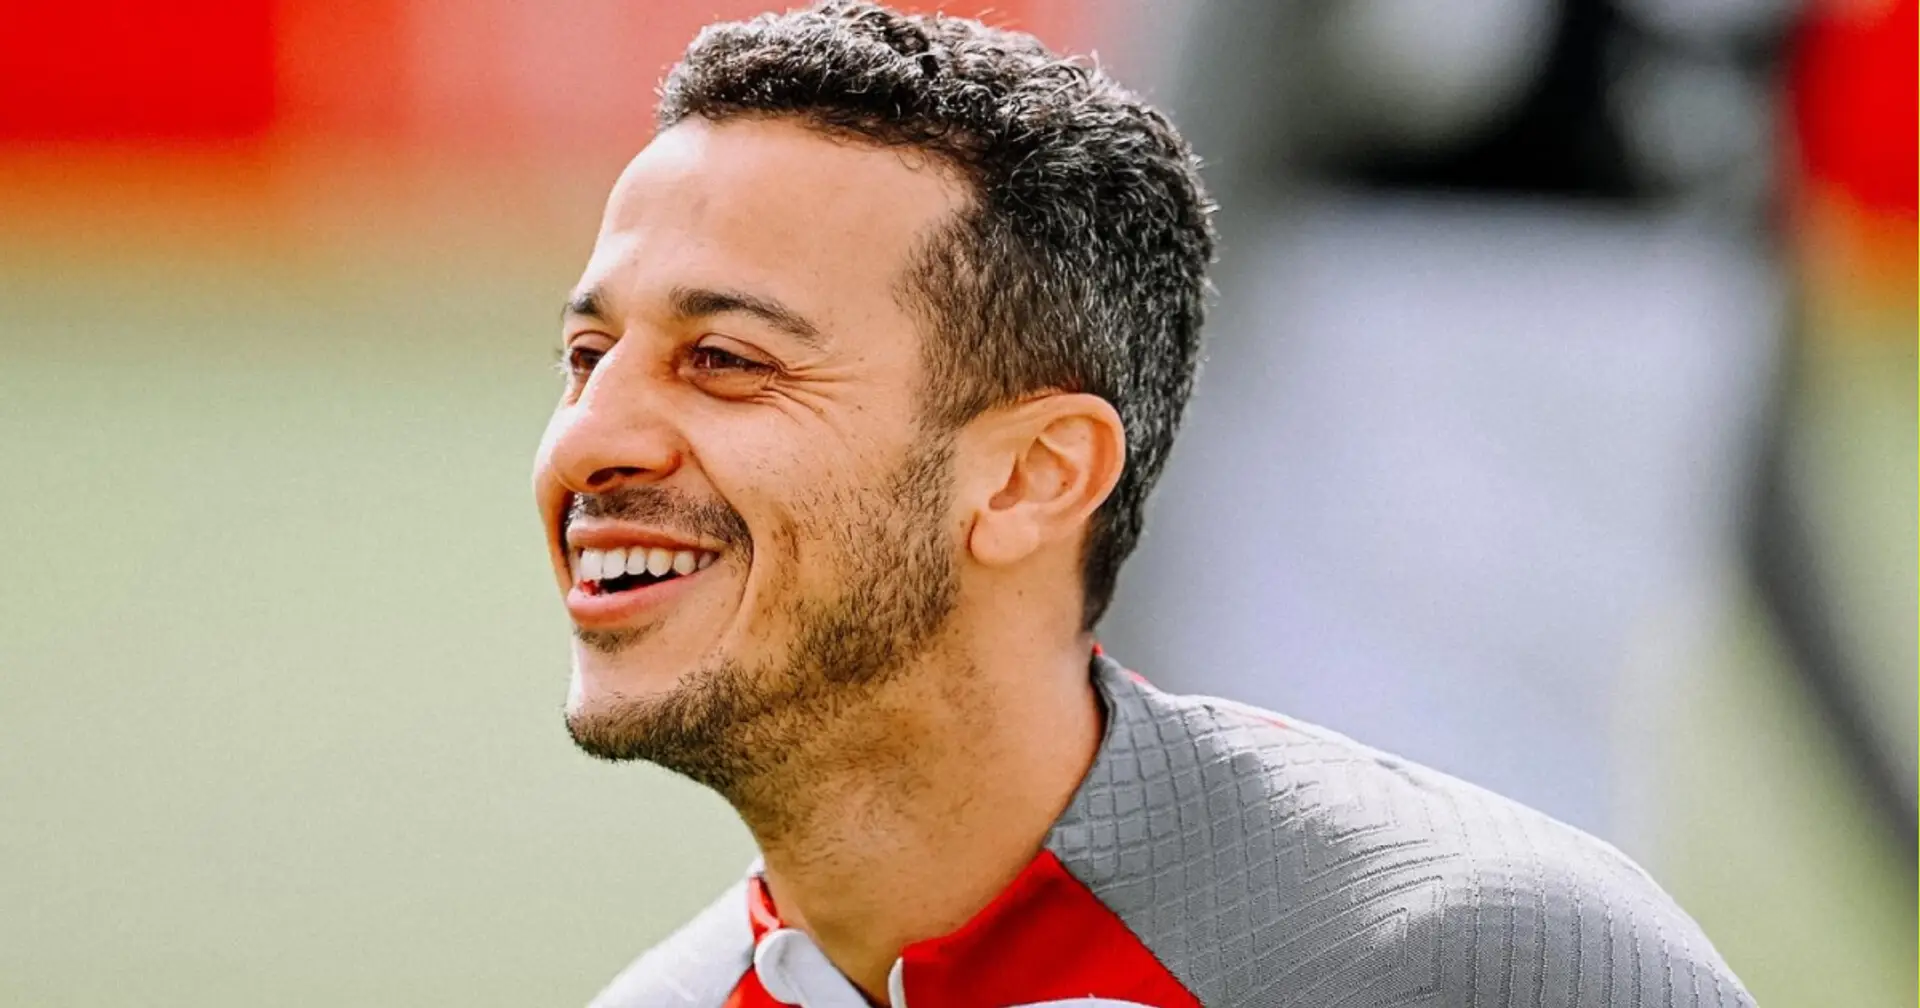 Thiago returns to full training and 3 more big stories you might've missed